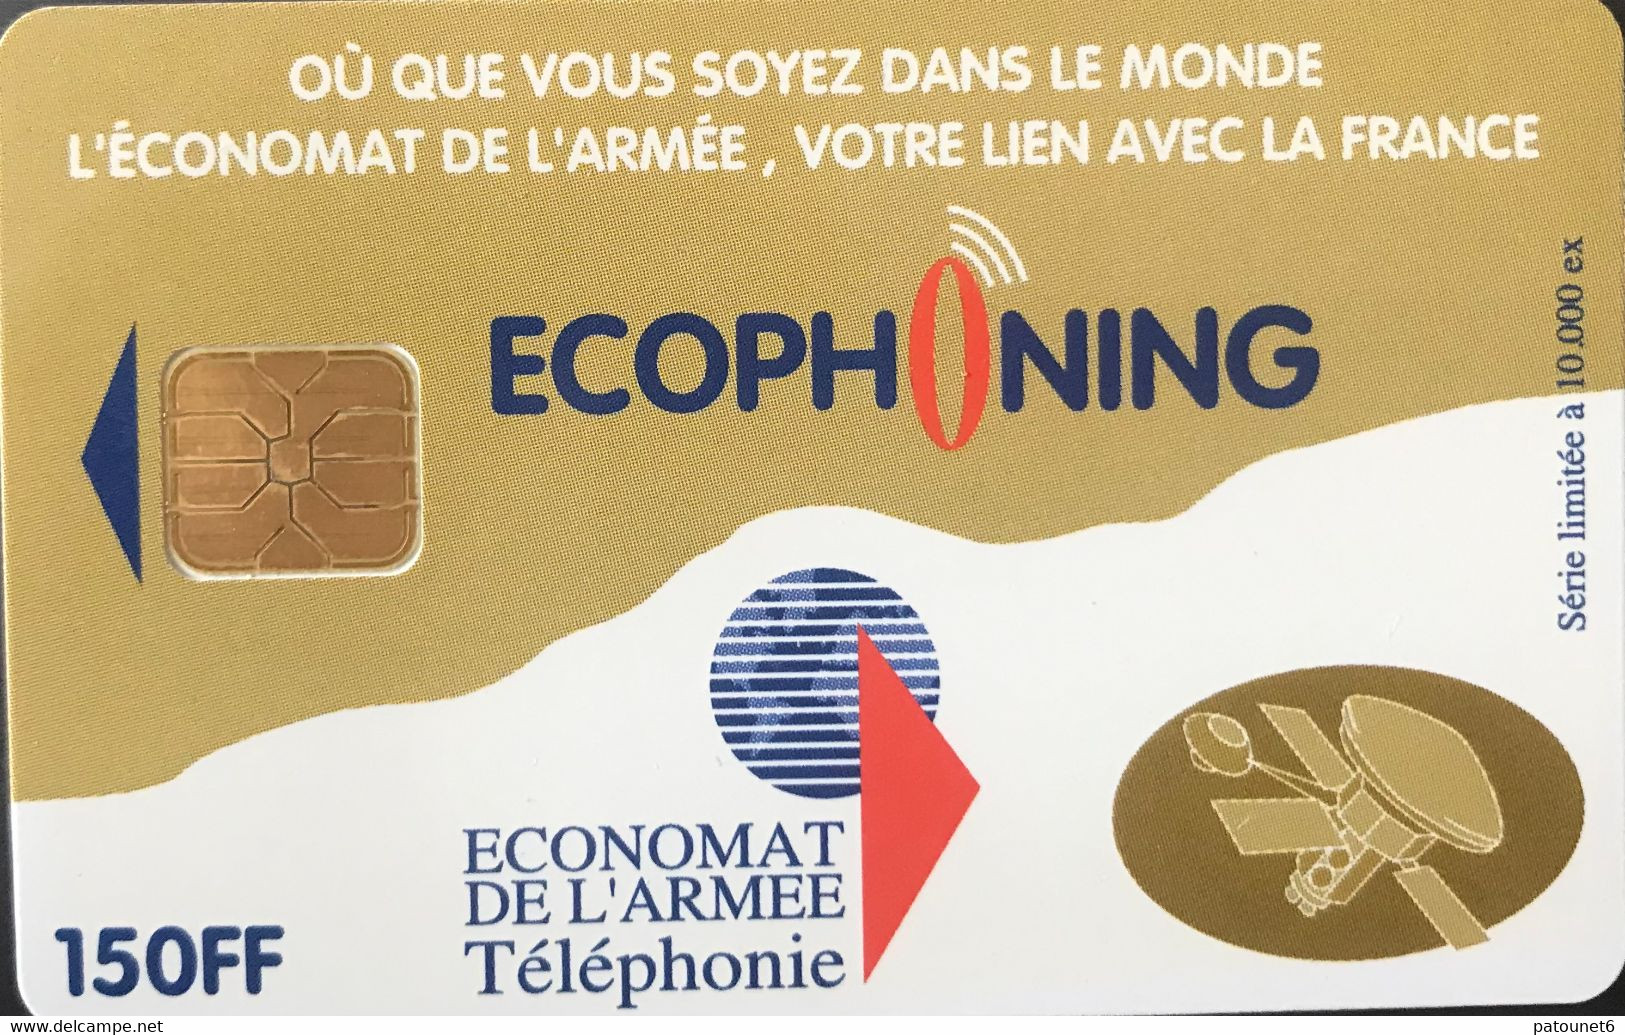 FRANCE  -  ARMEE  -  Phonecard  -  ECOPHONING  -  Satellite  -  Marron Clair  -  150 FF -  Cartes à Usage Militaire